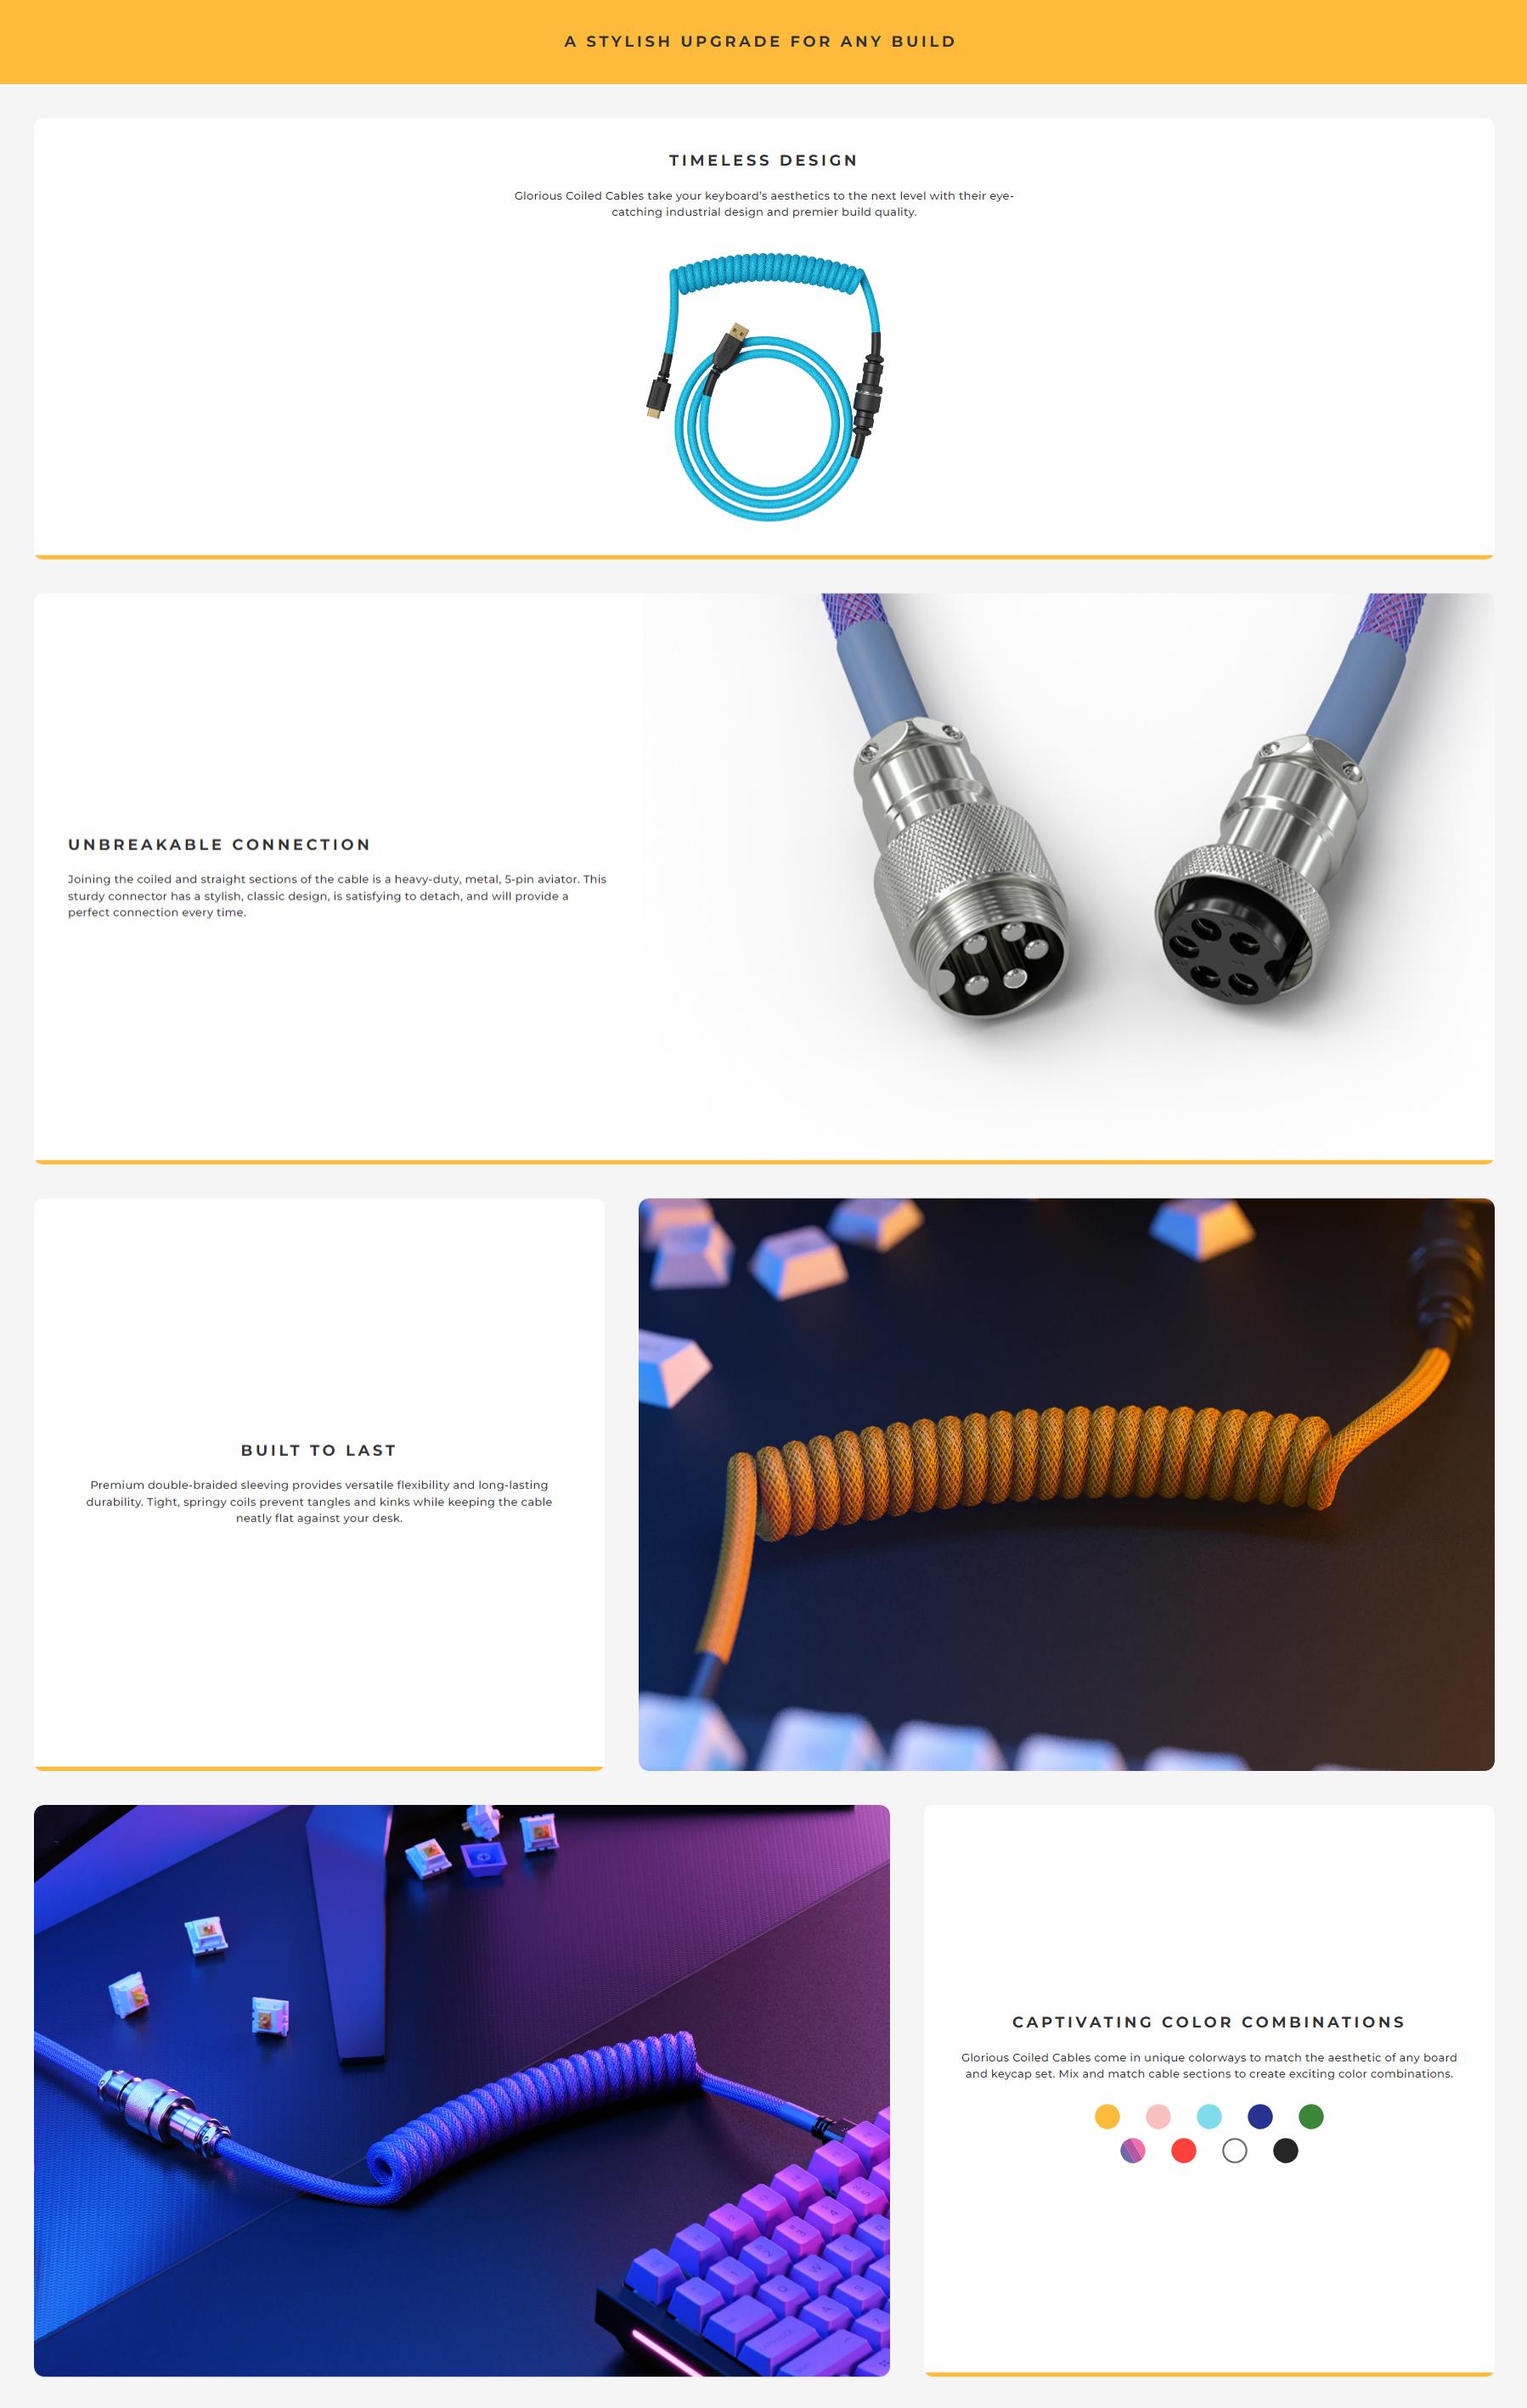 A large marketing image providing additional information about the product Glorious Coiled USB-C Keyboard Cable - Ghost White - Additional alt info not provided